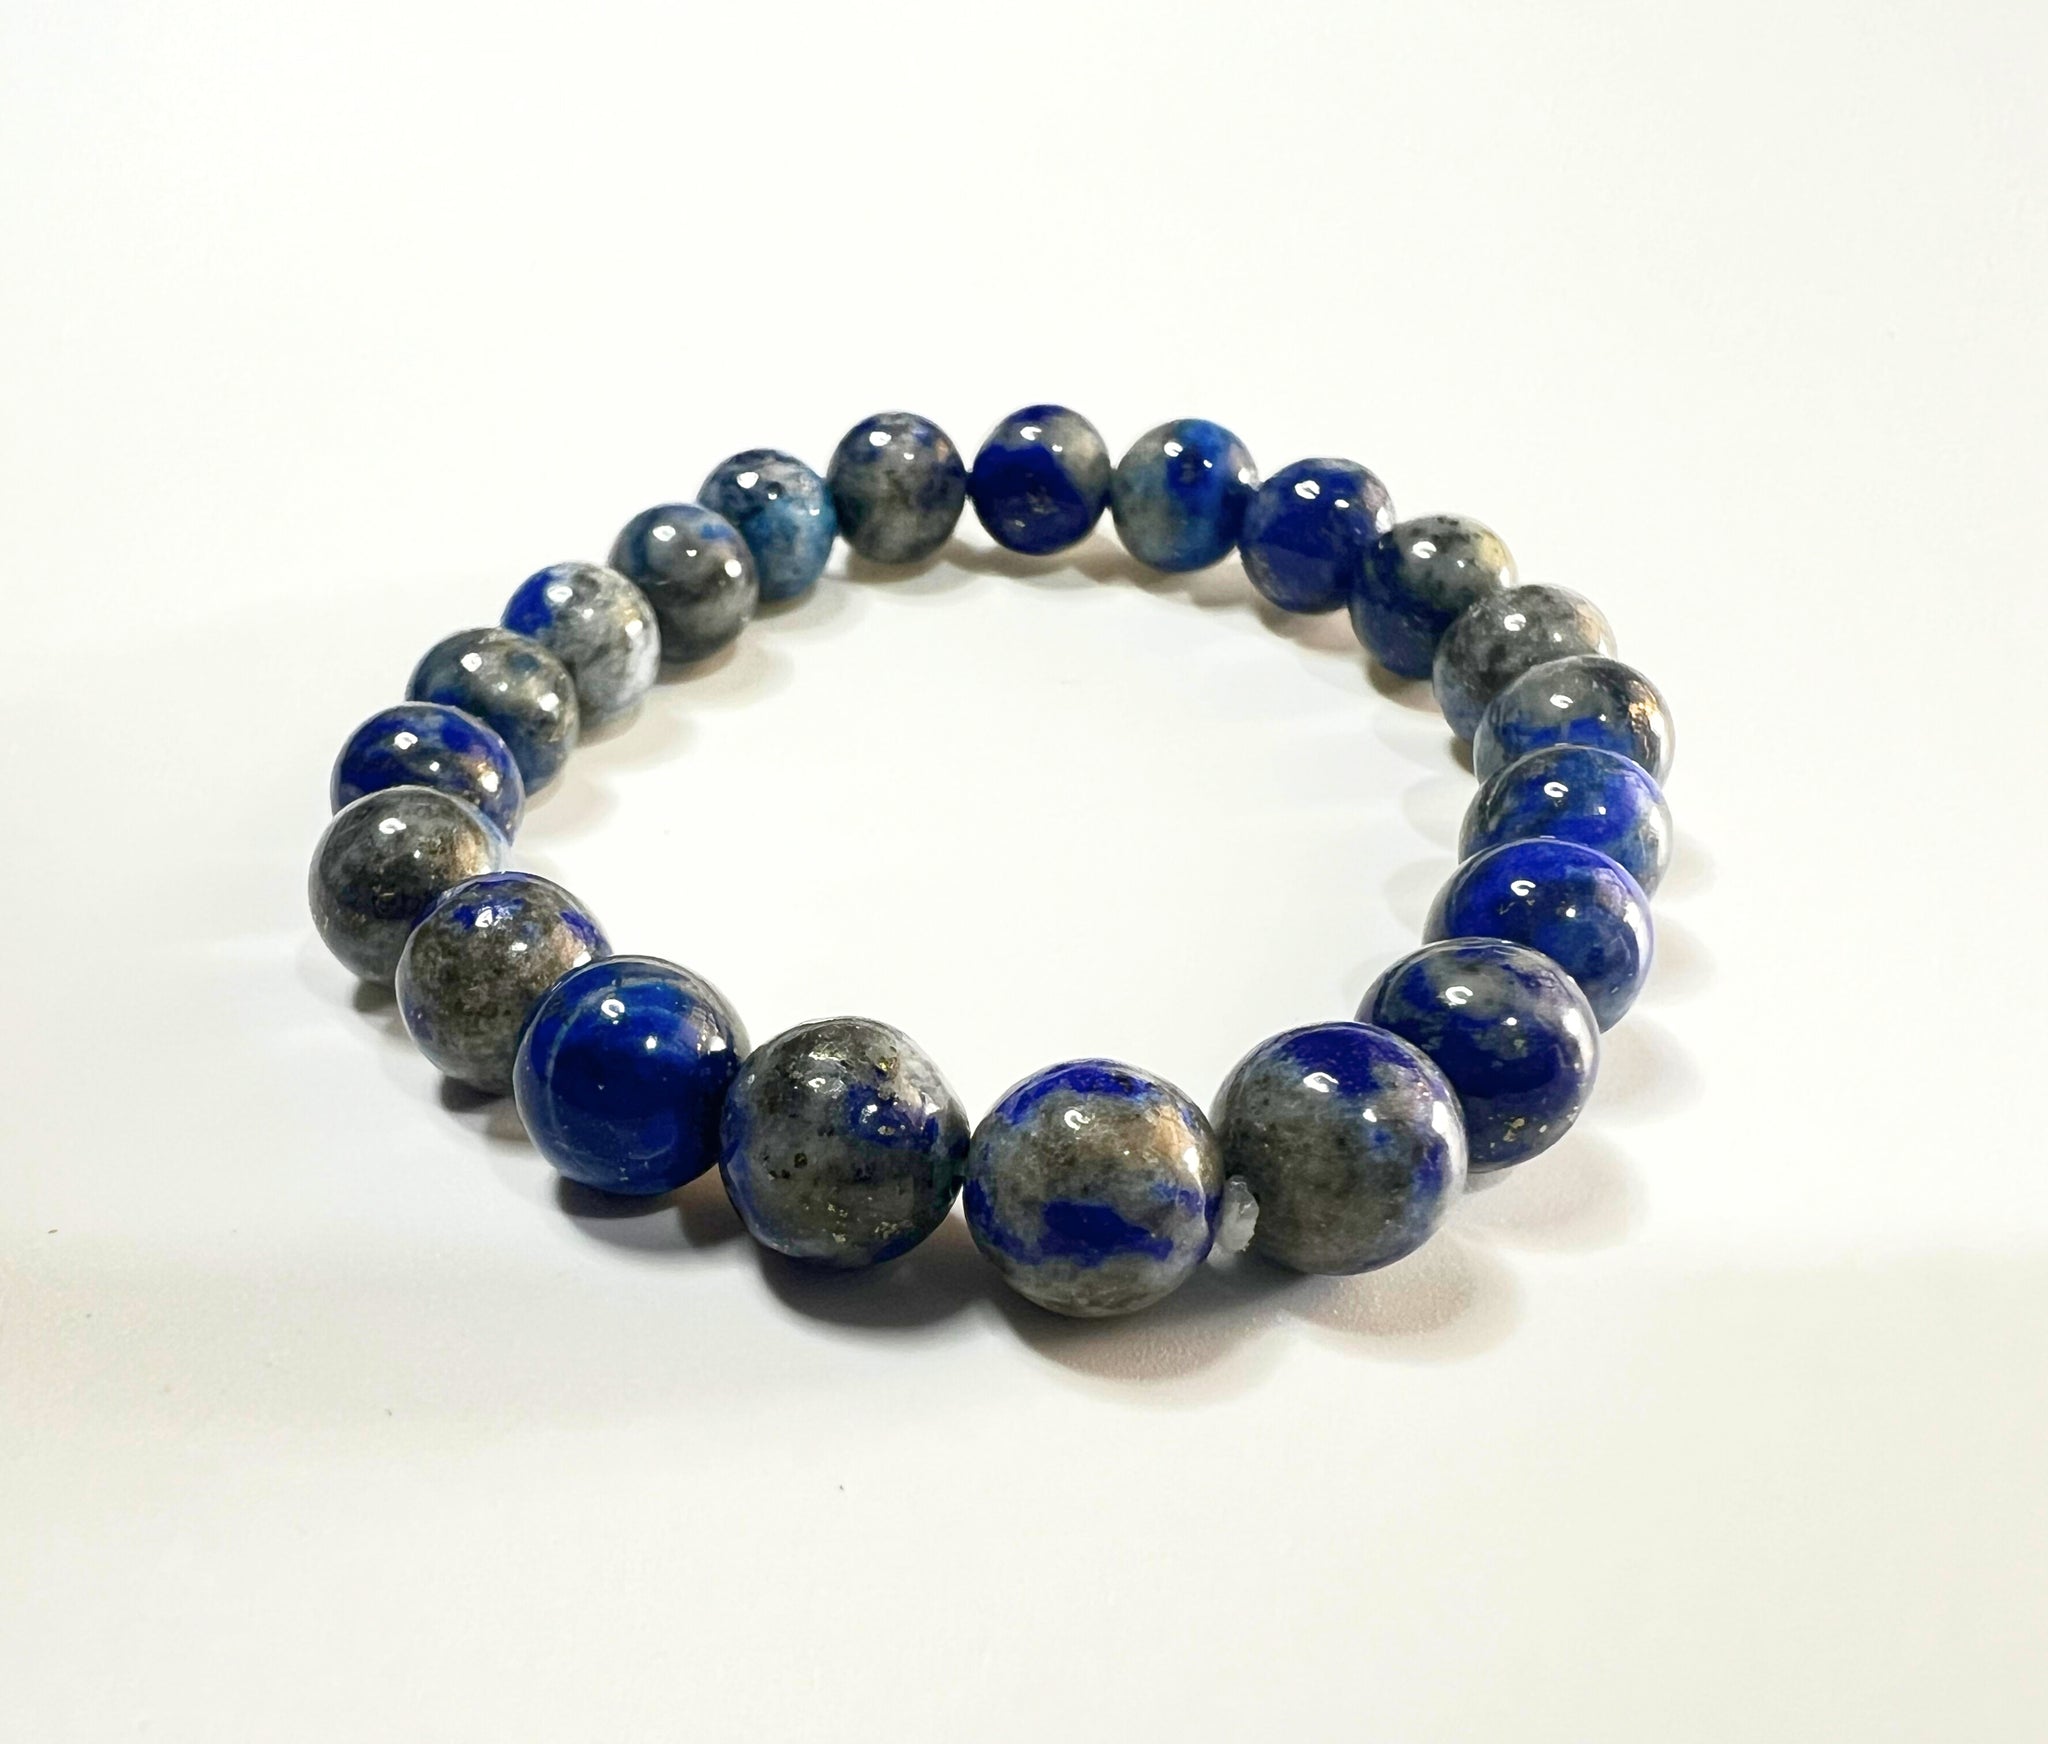 CRYSTAL LAPIS LAZULI  BRACELET CERTIFIED BLUE COLOUR MEDITATION HEALING ACCESSORY HOME OFFICE GIFT JEWELLERY